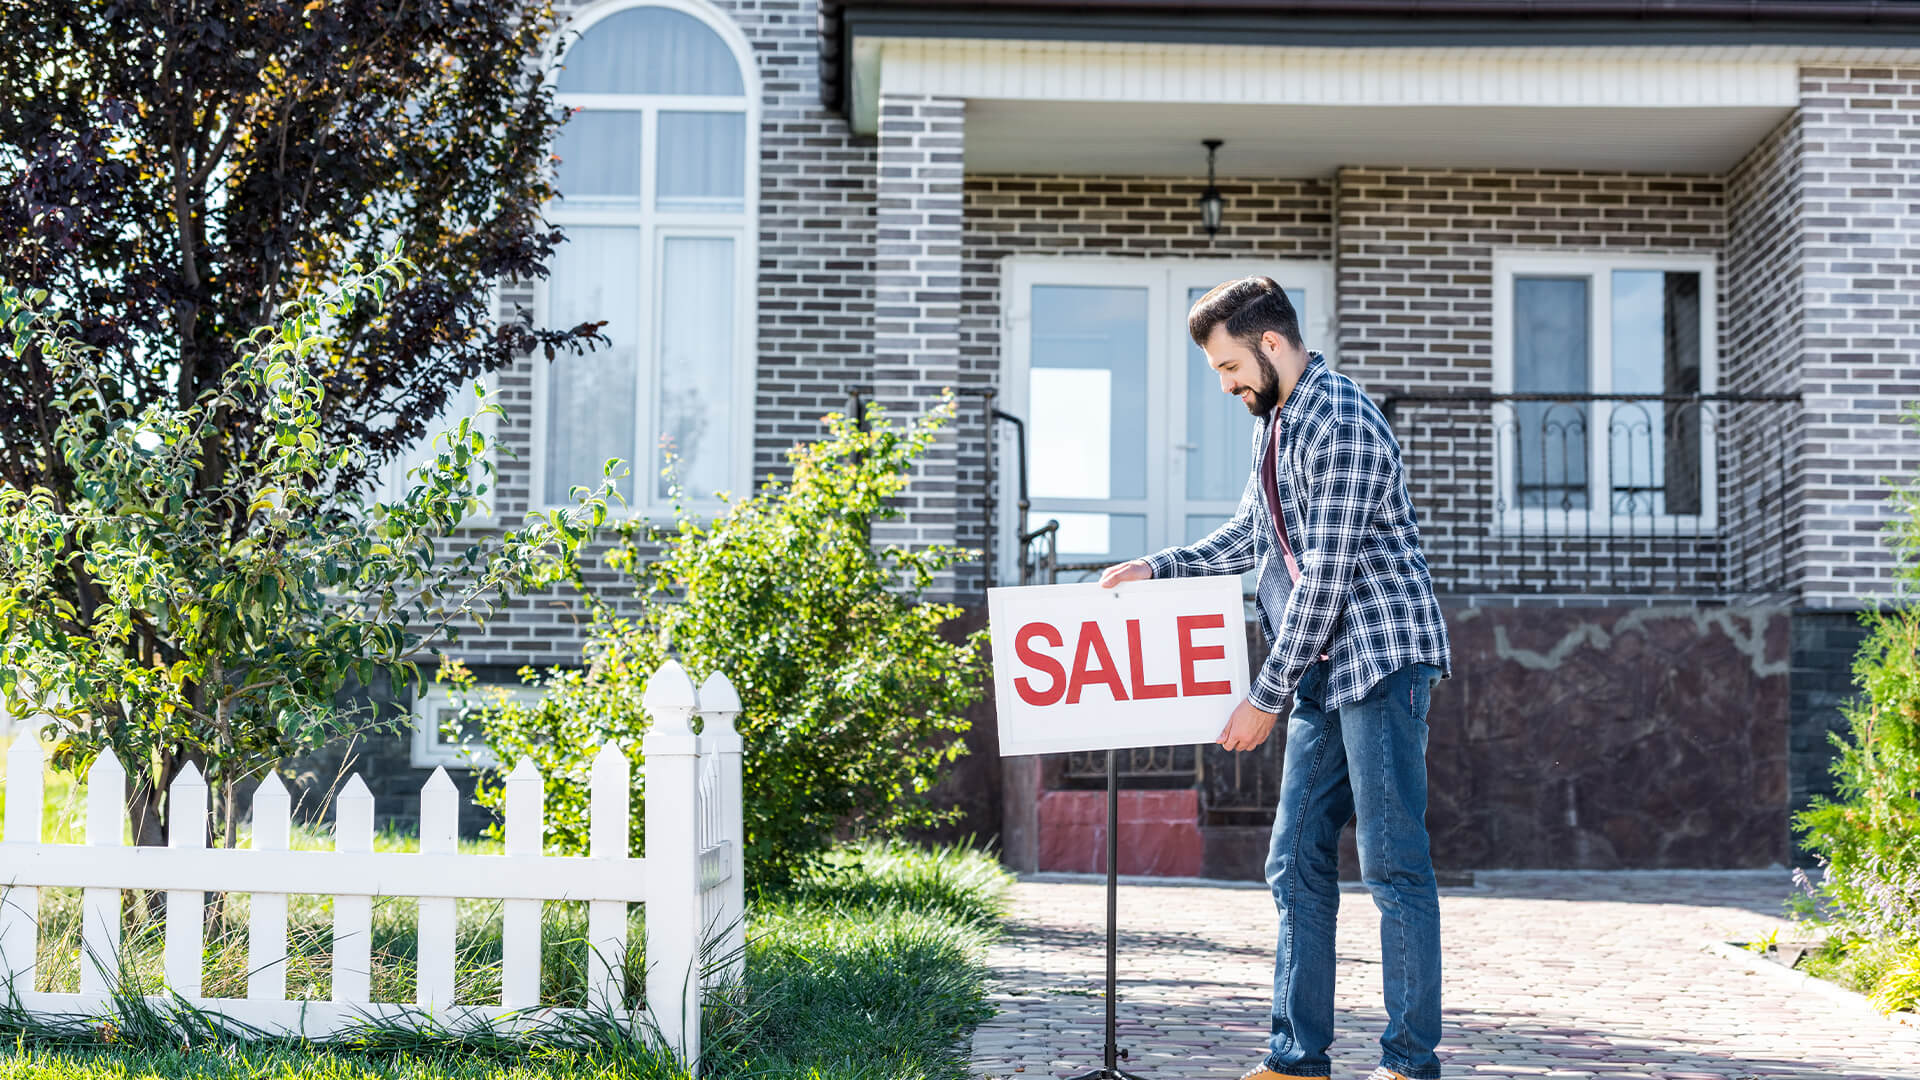 Why Selling Your Home Might Not Be the Best Move